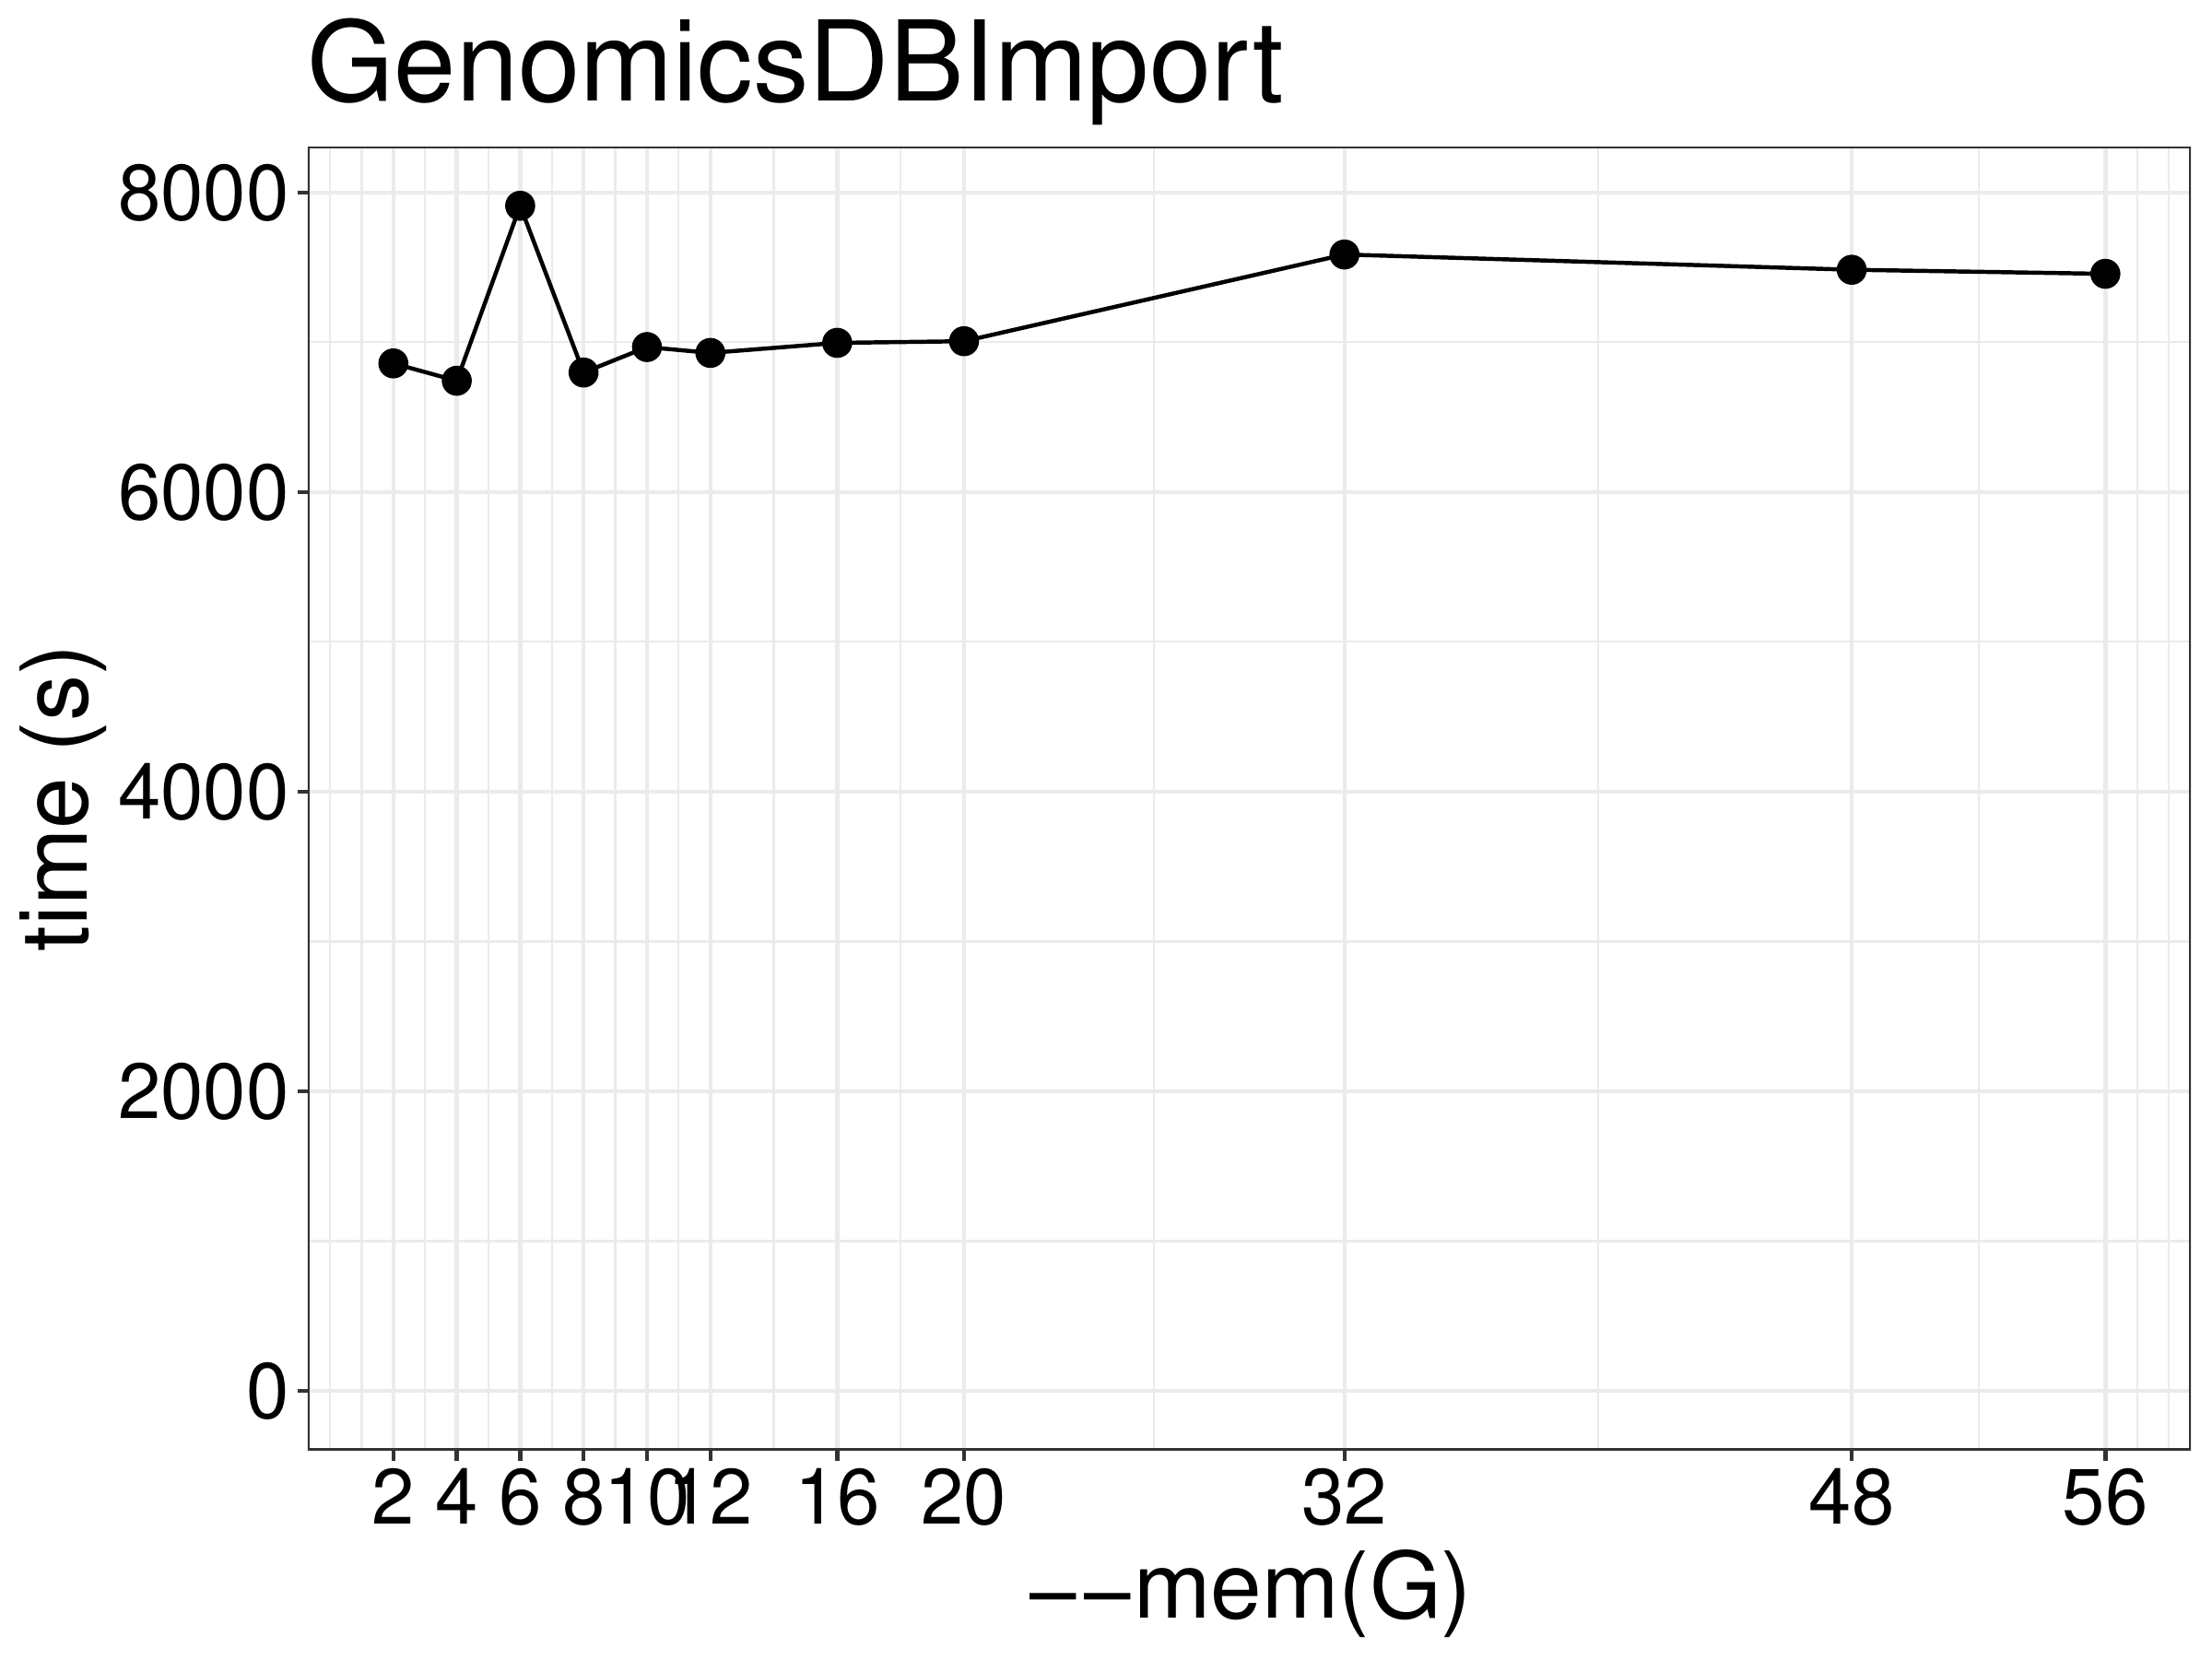 Runtime of GenomicsDBImport as a function of allocated memory.